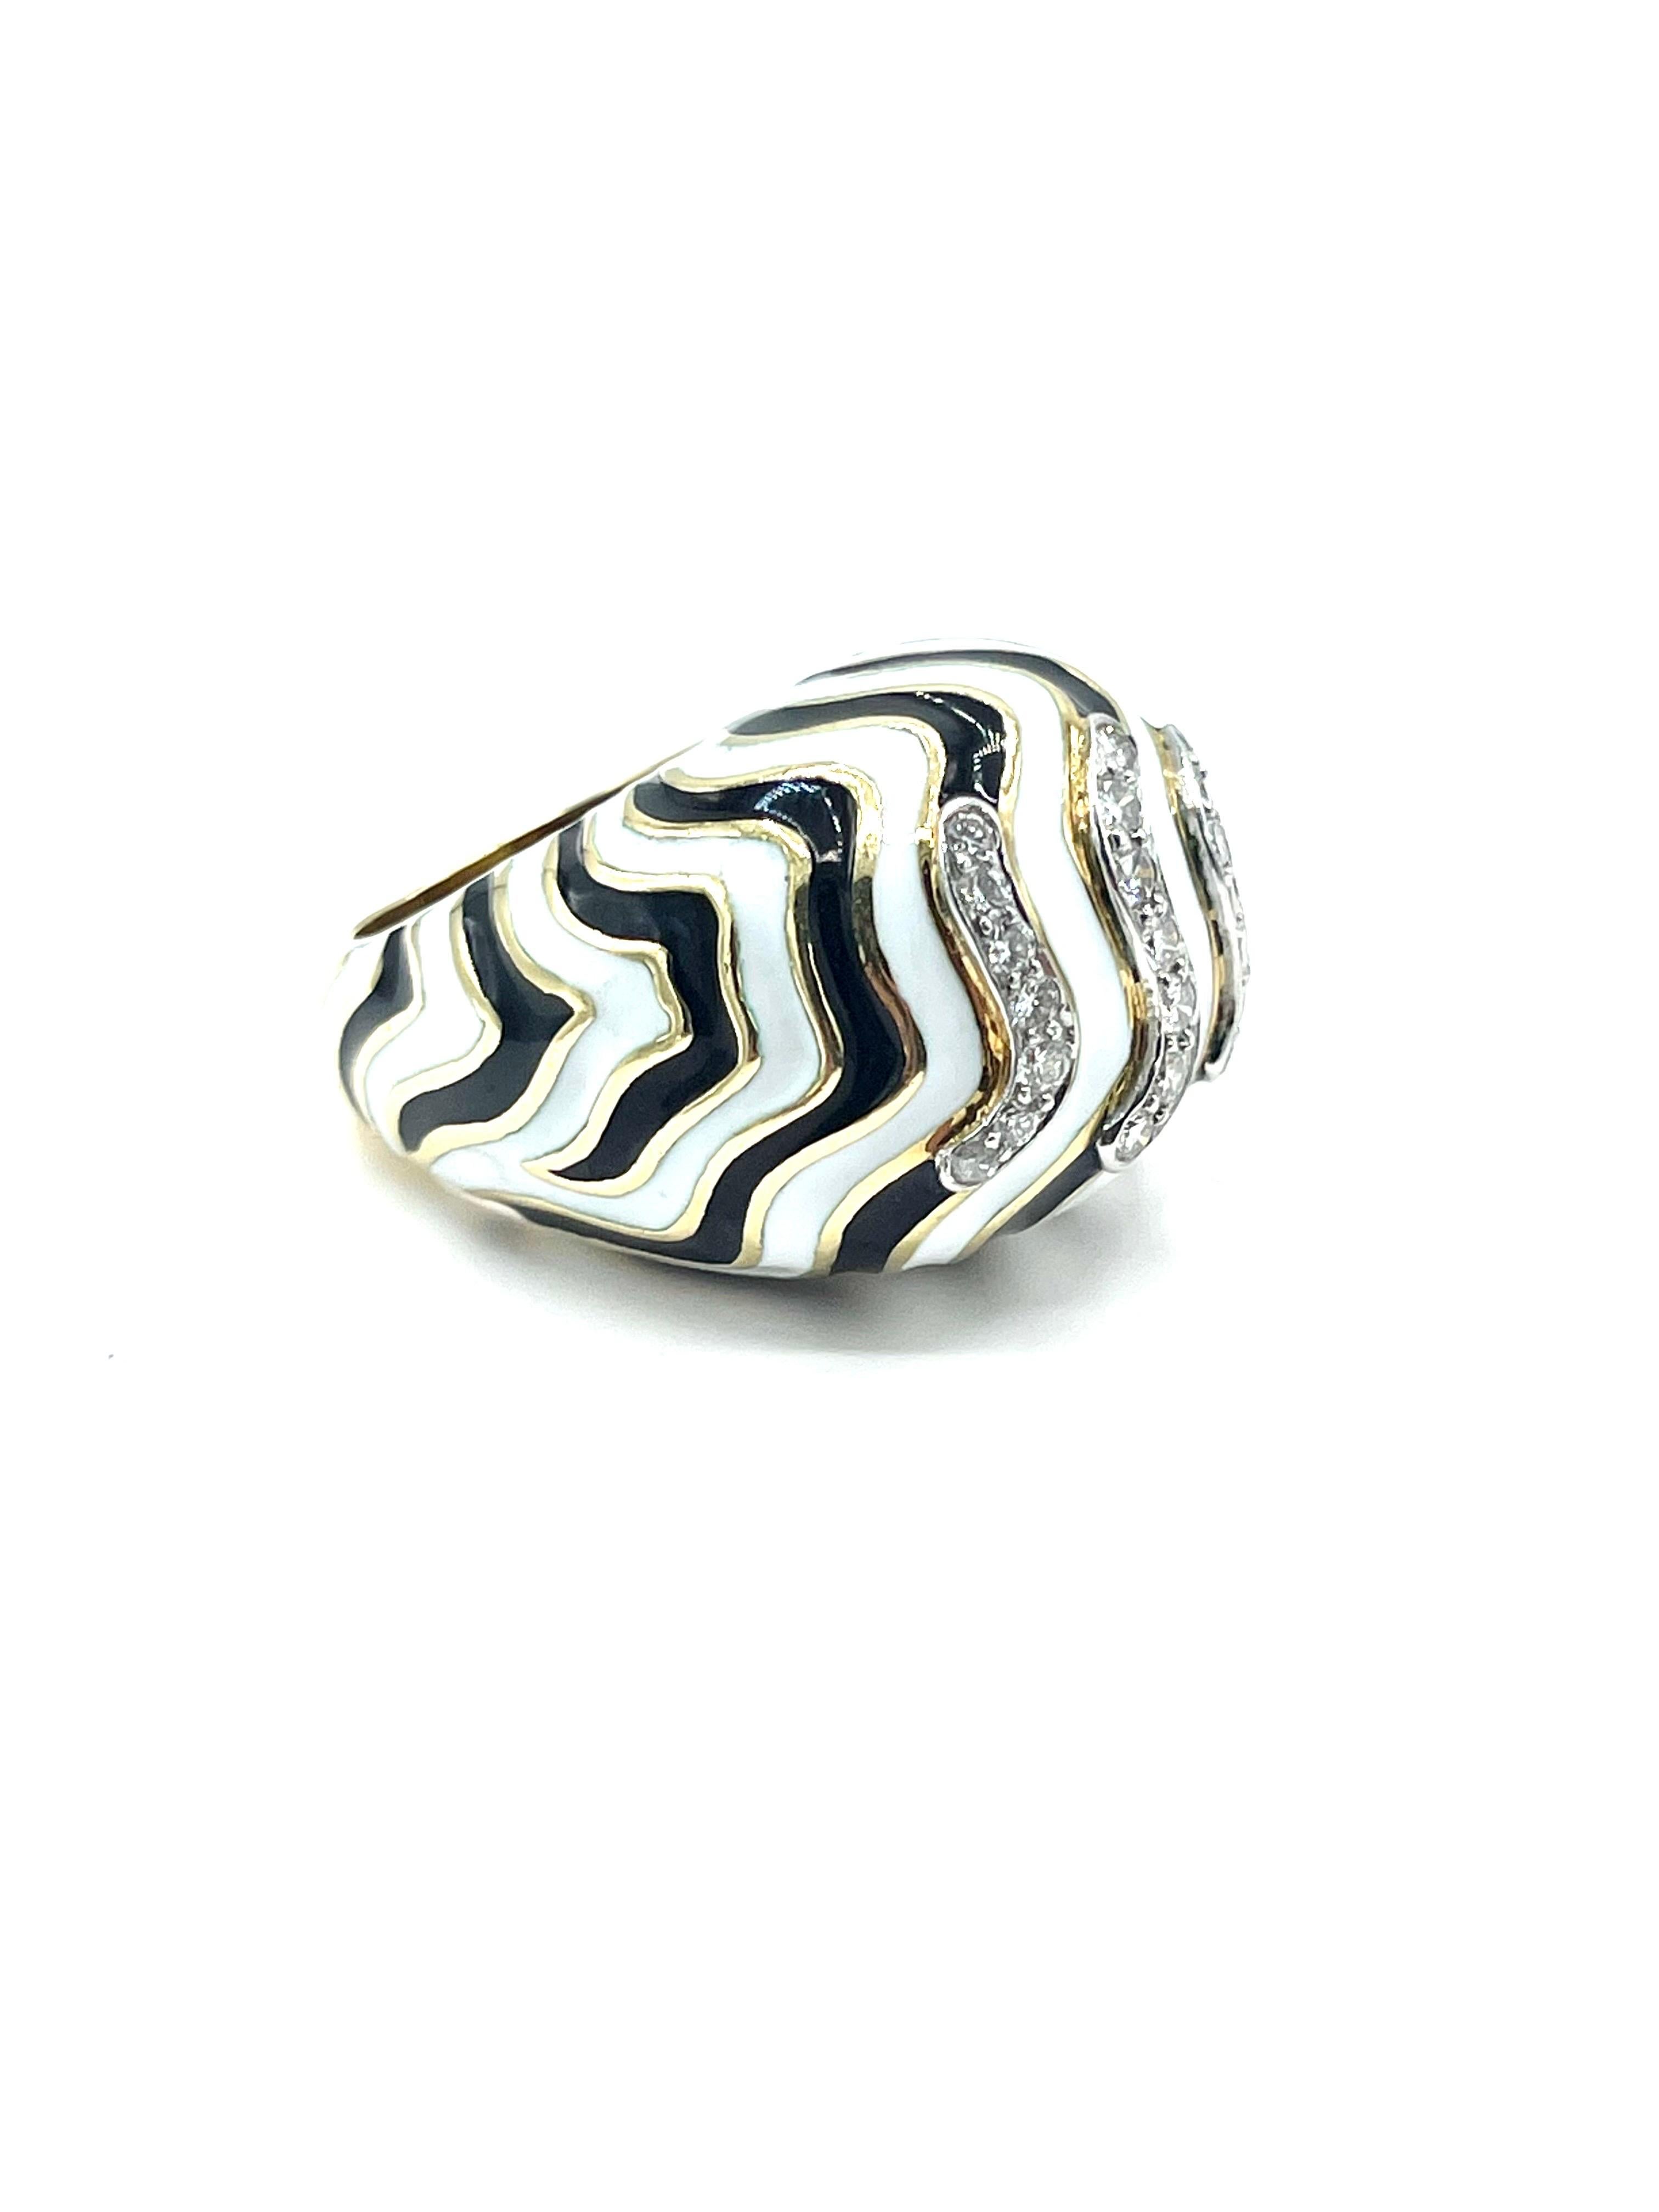 Round Cut David Webb 0.50 Carat Round Brilliant Diamond and Striped Enamel Cocktail Ring For Sale